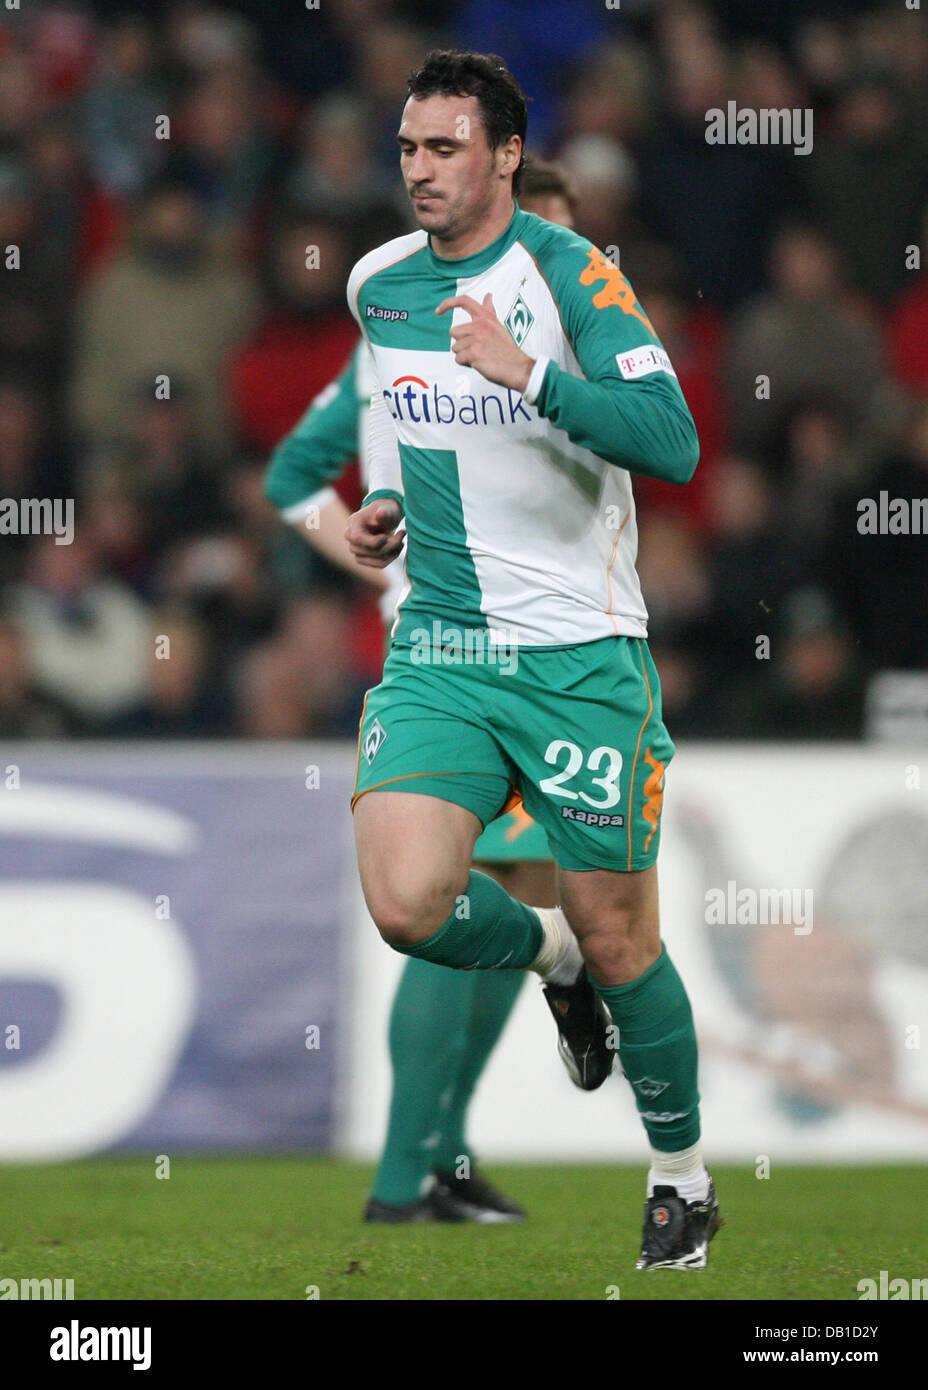 Hugo Almeida of Bremen is sent off the pitch after getting a red card during the Bundesliga match Hanover 96 vs Werder Bremen at AWD-Arena stadium in Hanover, Germany, 08 December 2007. Hanover defeated Bremen 4-3. Photo: Friso Gentsch Stock Photo